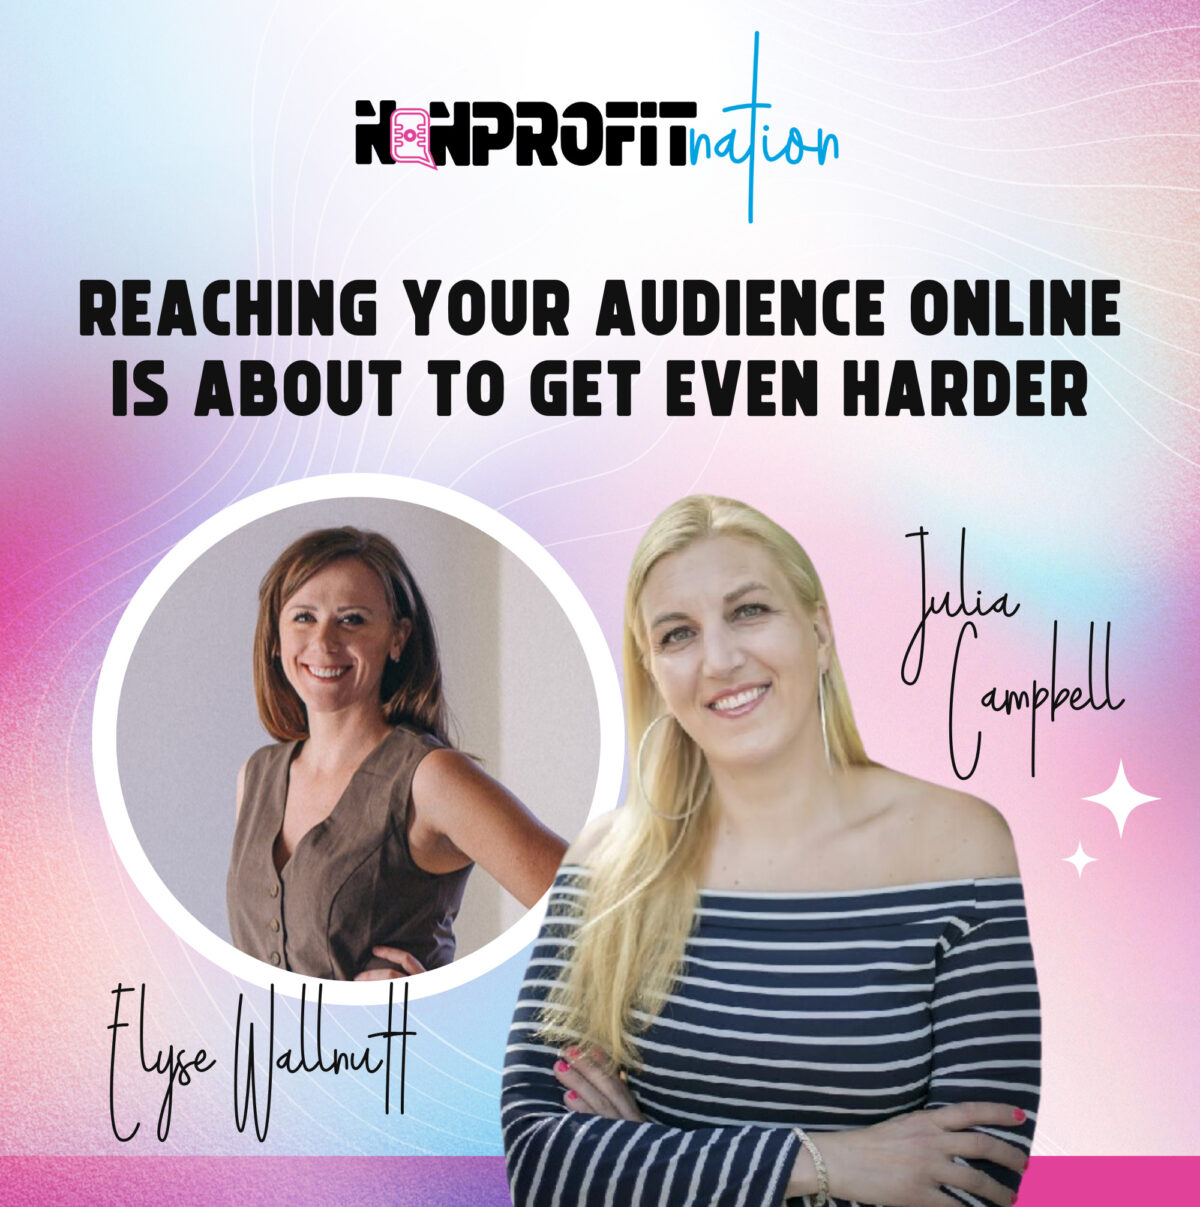 Reaching Your Audience Online Is About To Get Even Harder with Elyse Wallnutt